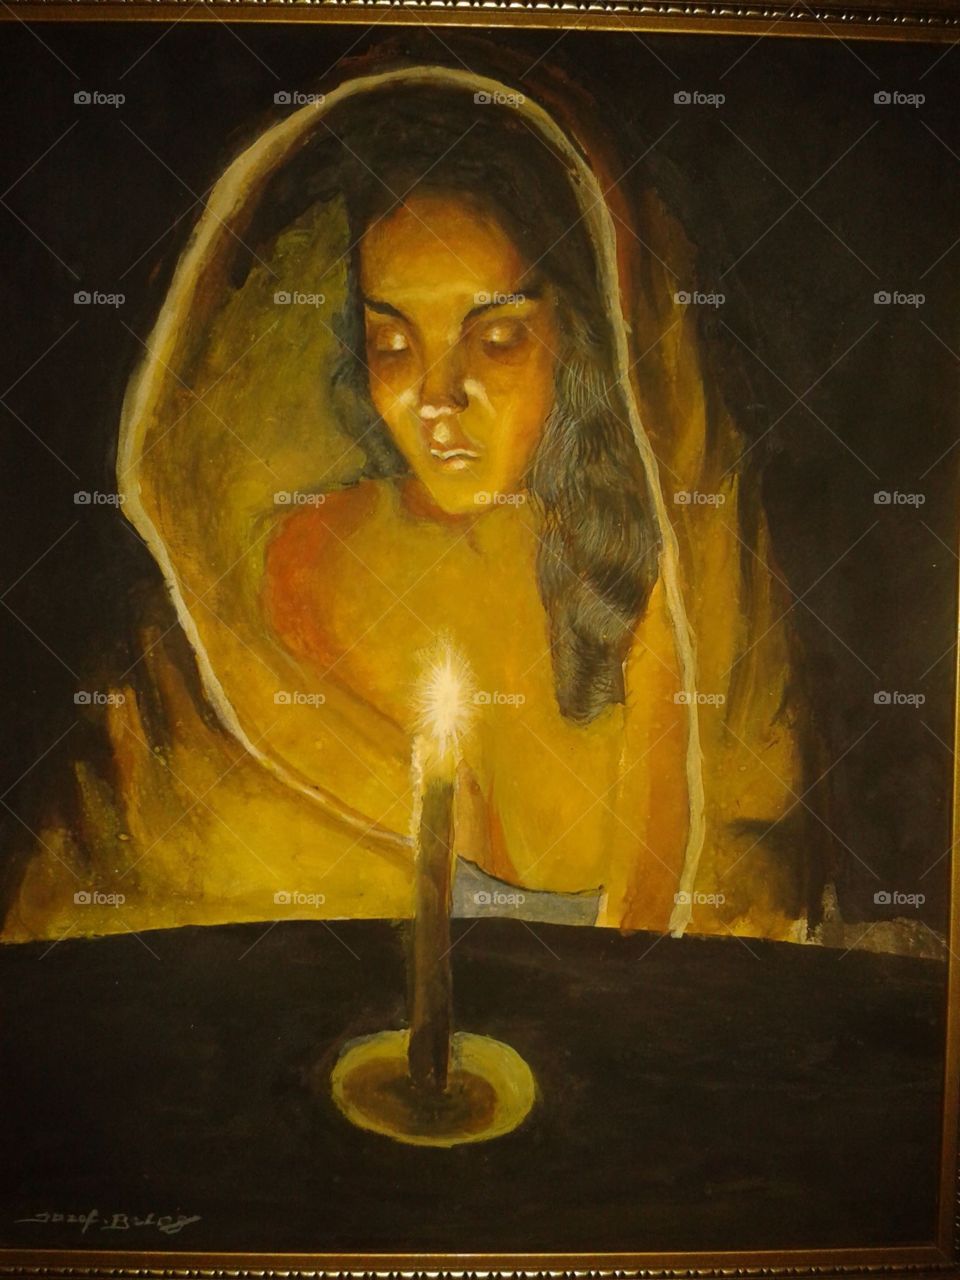 My oil painting picture of a women.
